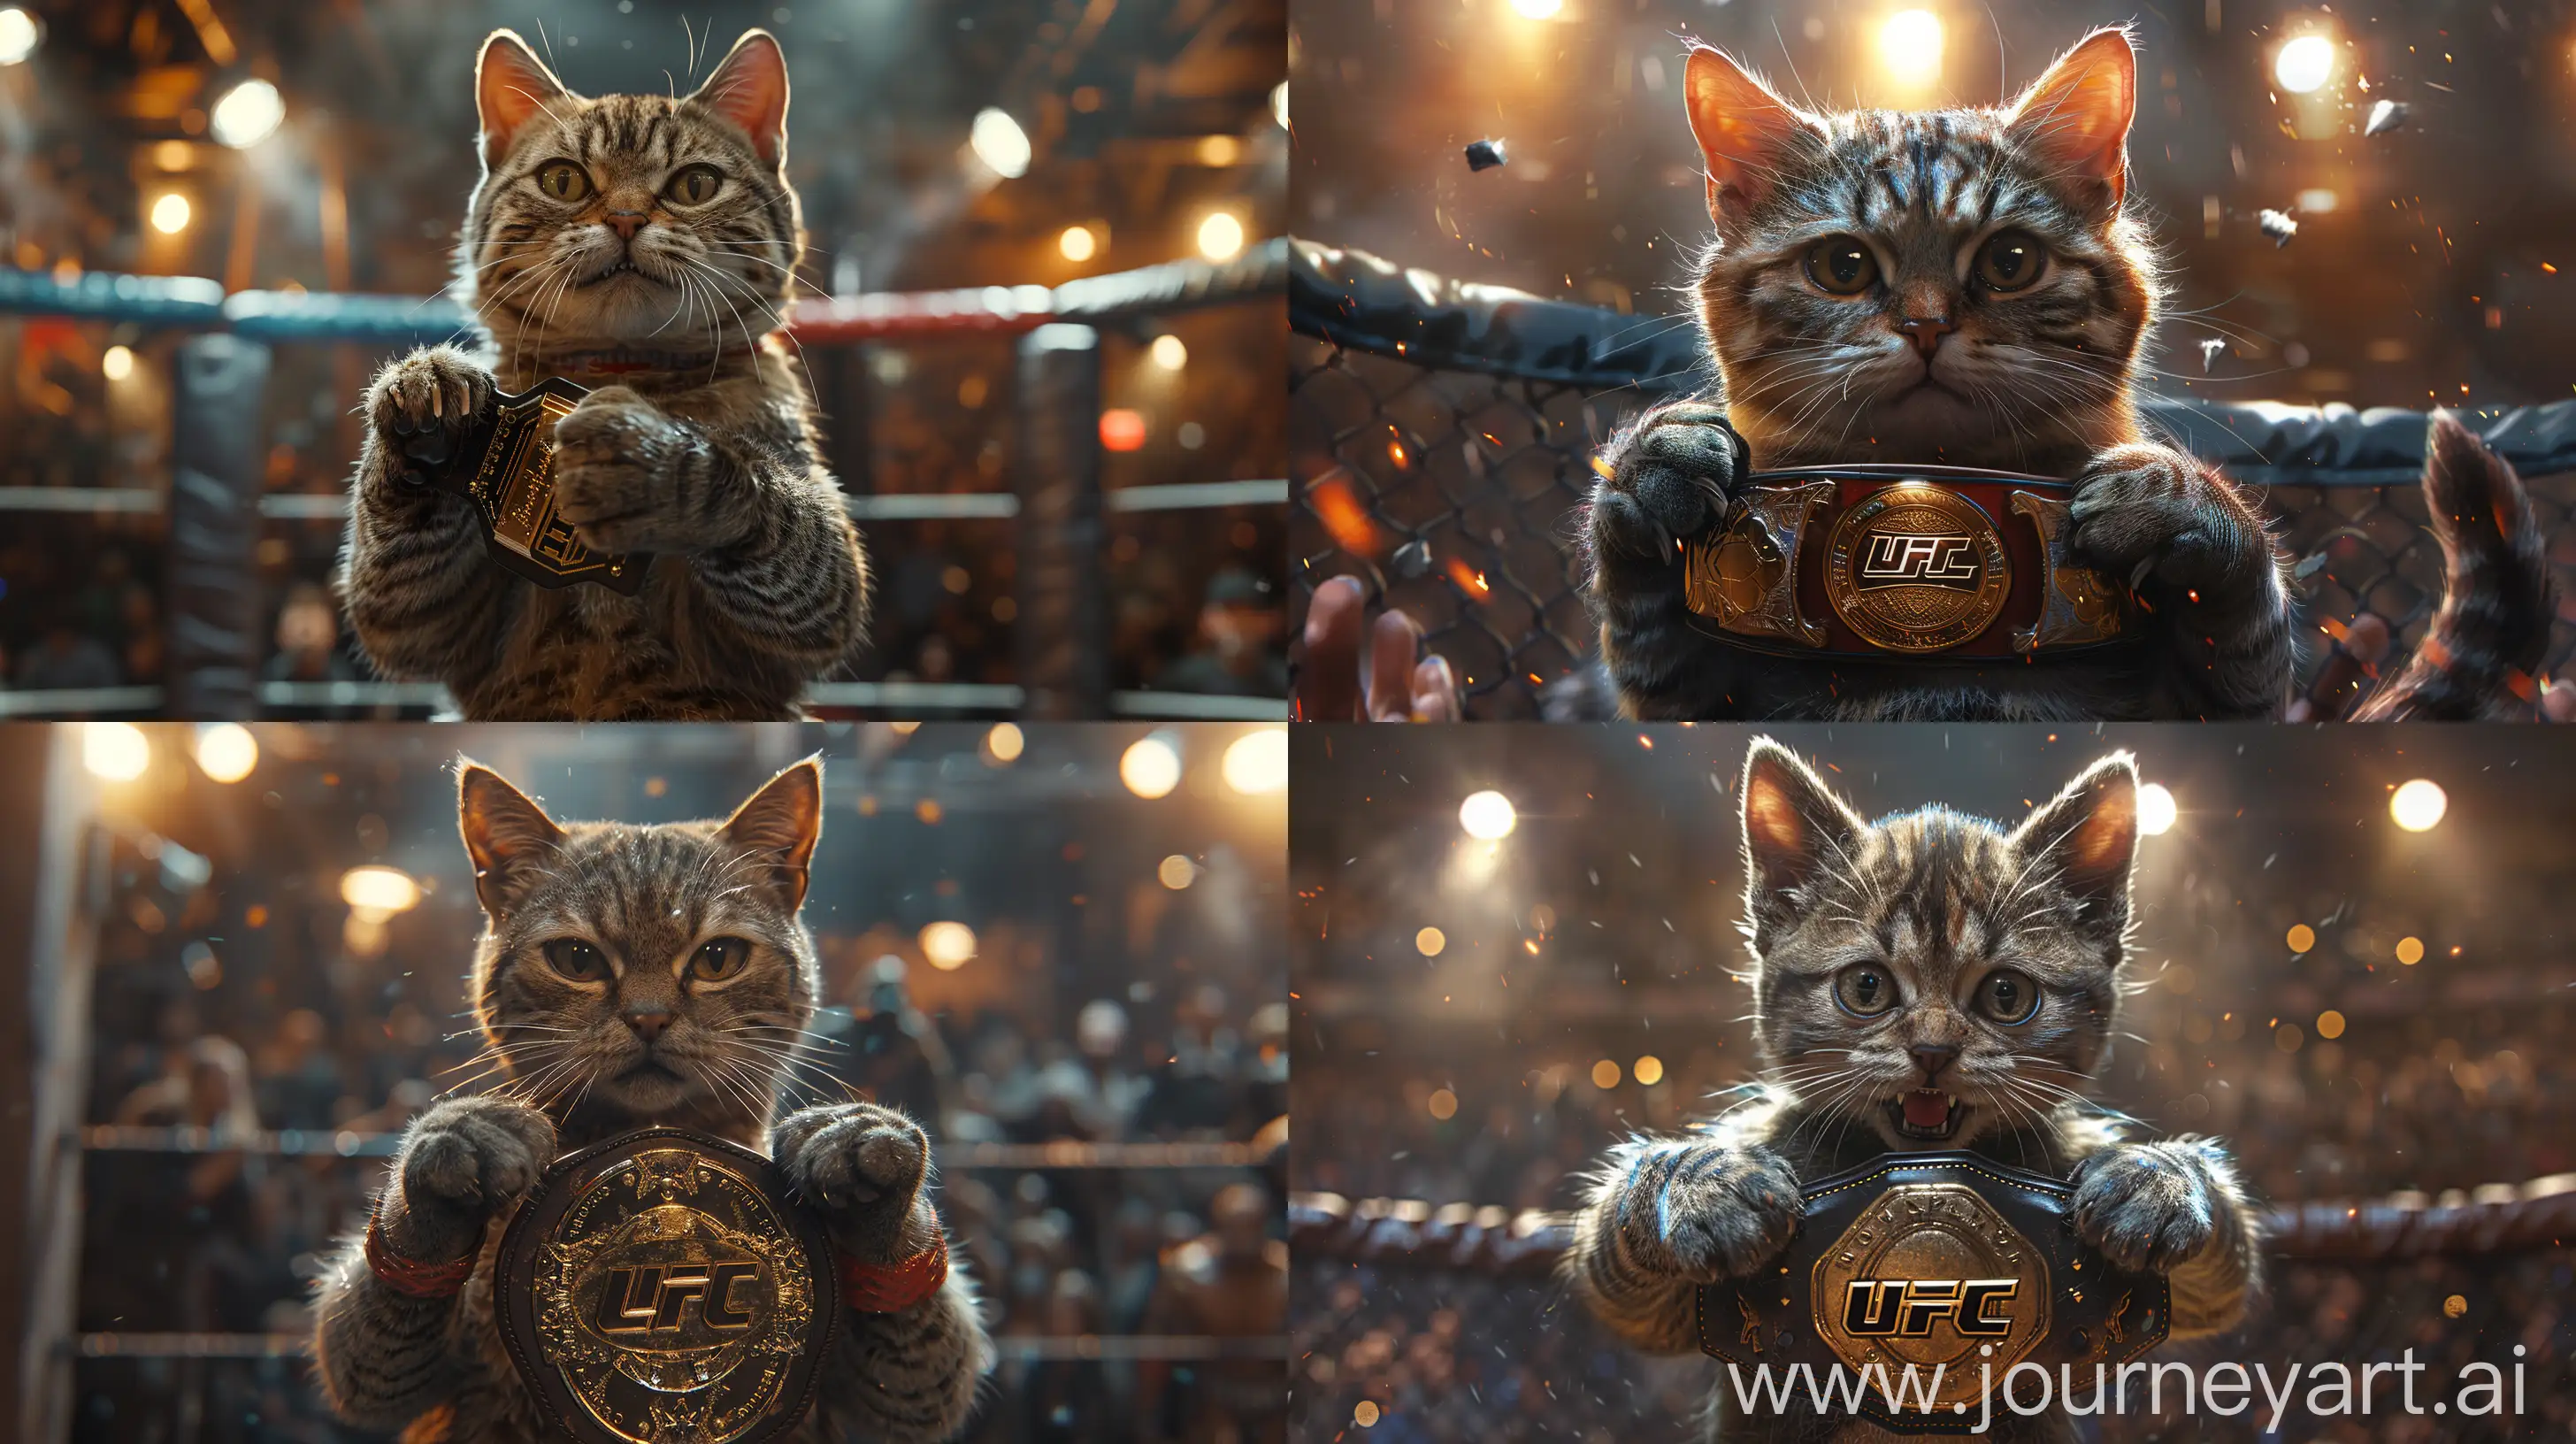  highly muscular cat victorious in dynamic WWE pose, clenching championship belt with authority, hyper-realistic fur and muscles, sports entertainment glory, intense mid-action wrestling ring, spotlights highlighting the scene, victory roar, crowd cheering in the background --ar 16:9 --s 750 --v 6